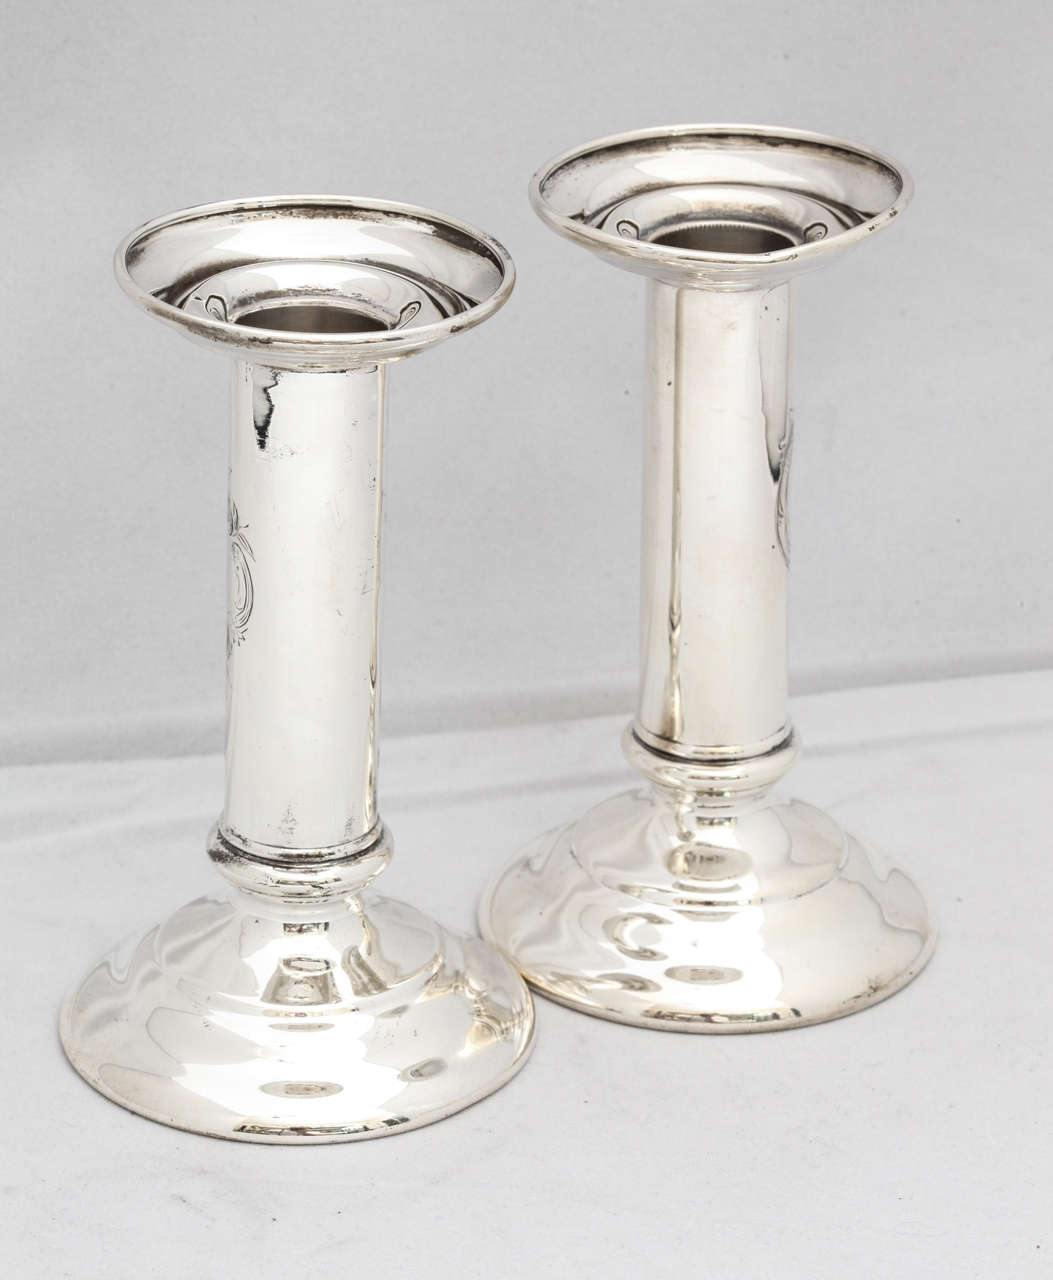 Sterling silver column-form candlesticks, Tiffany & Co., New York, year-dated for 1902-1903. Simple, elegant design; vacant cartouche. @ 5 1/4